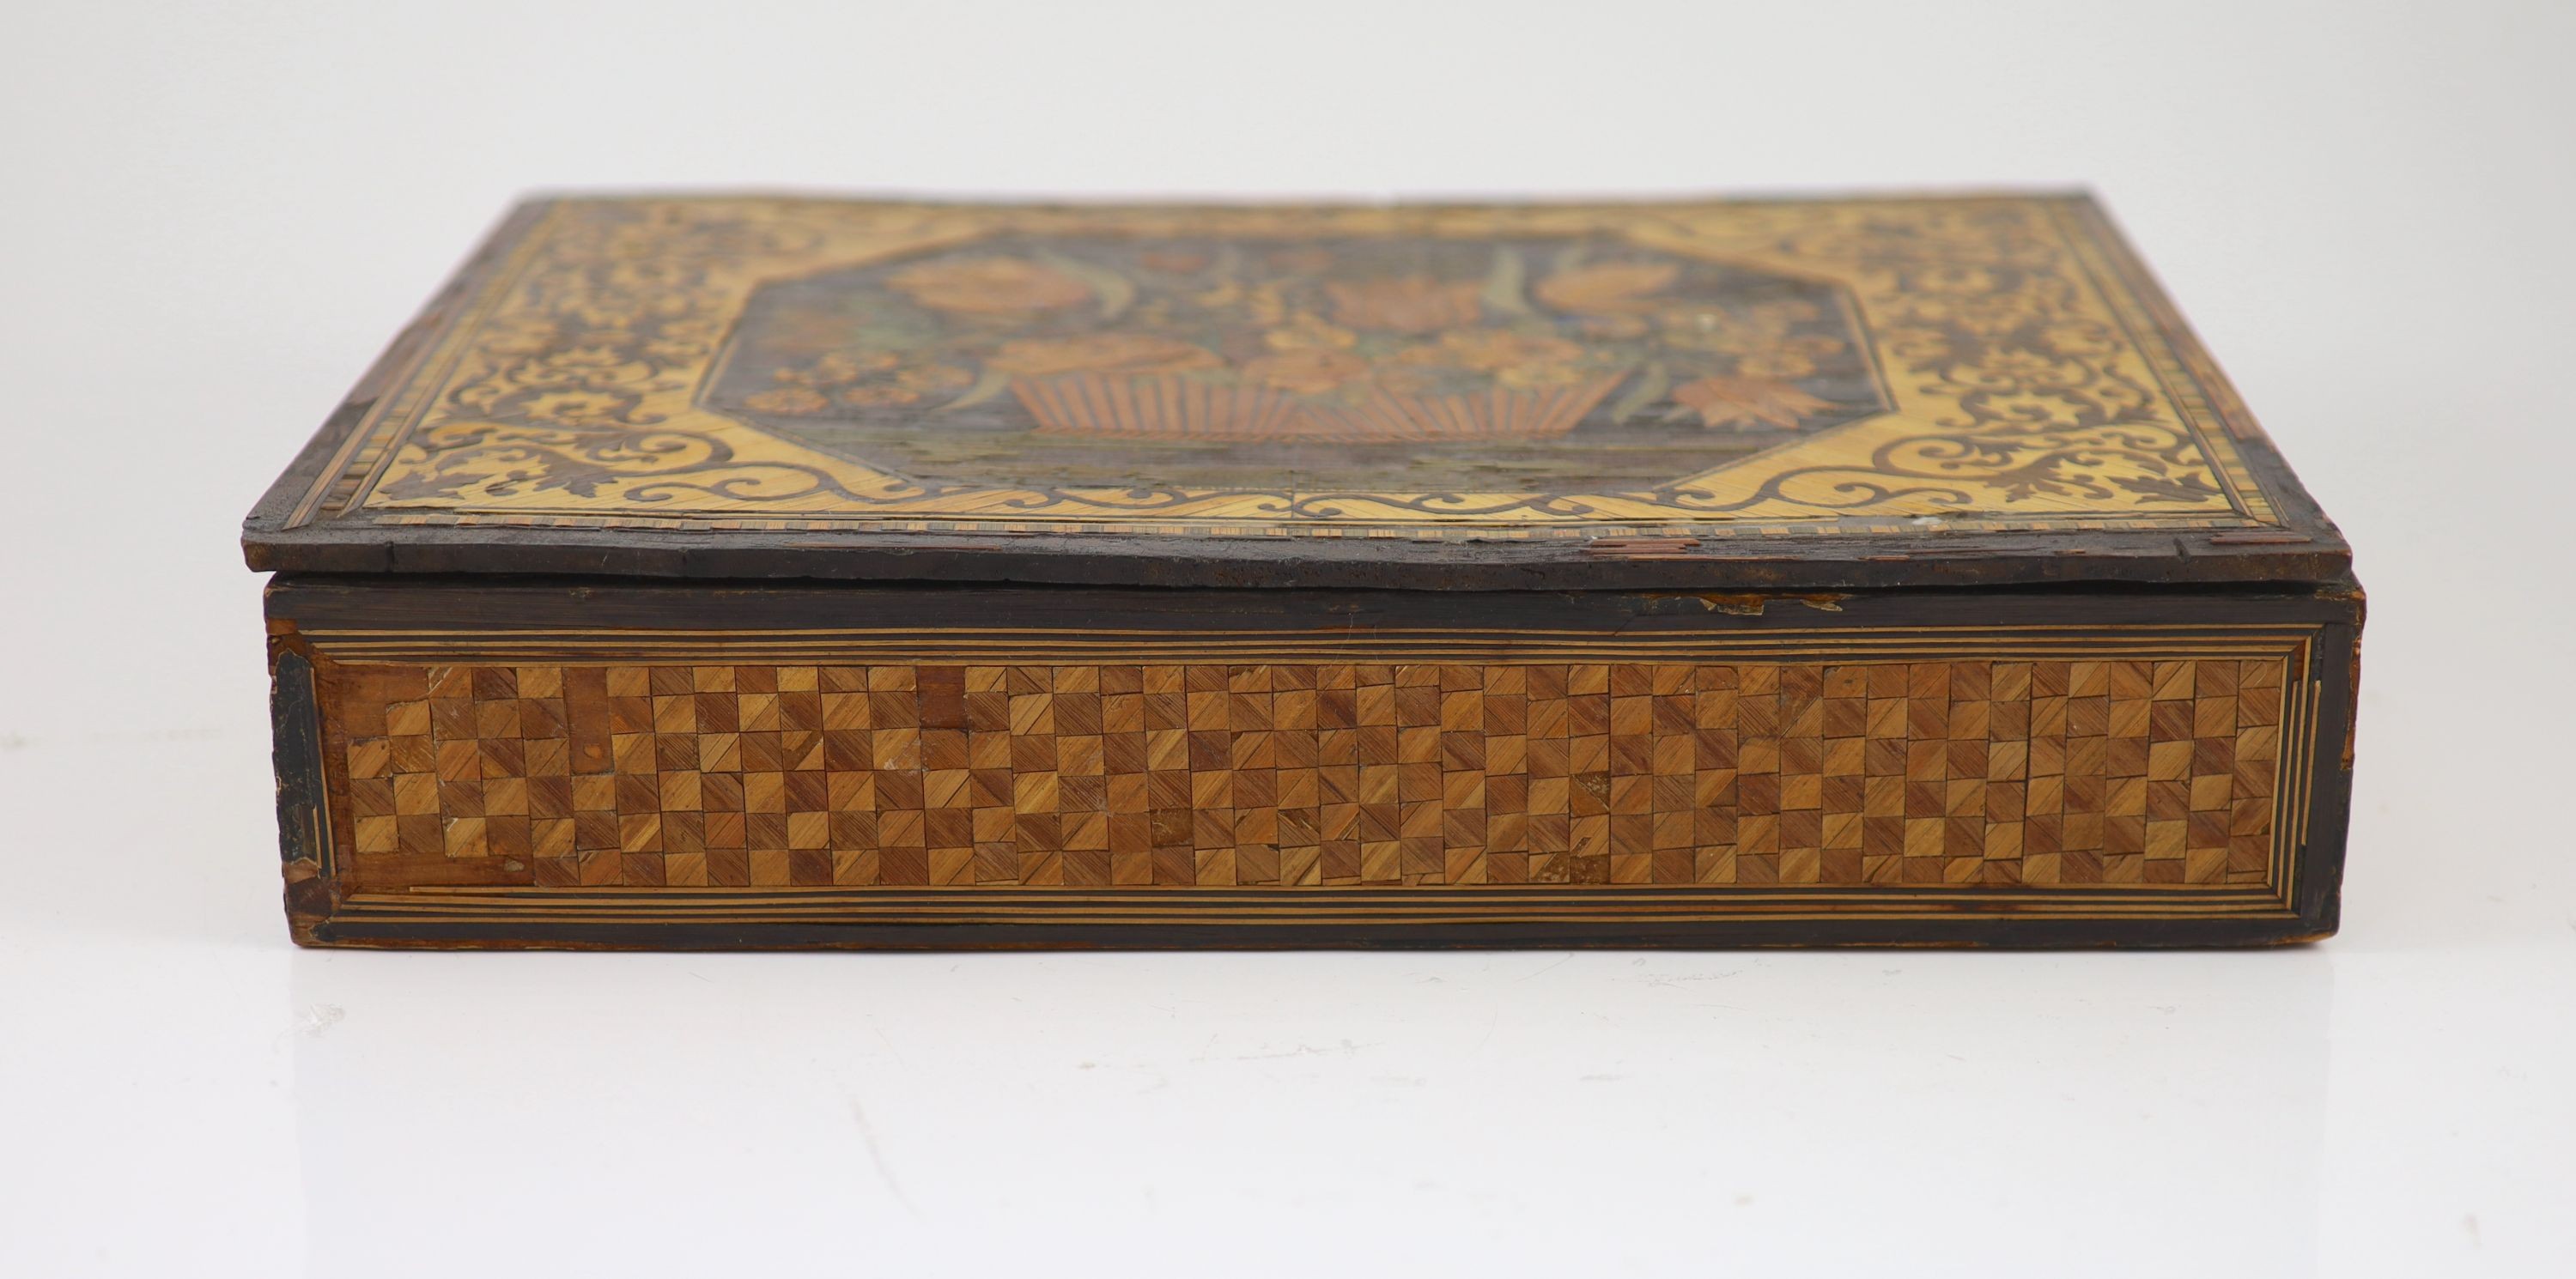 A 19th century coloured straw work box and detachable cover